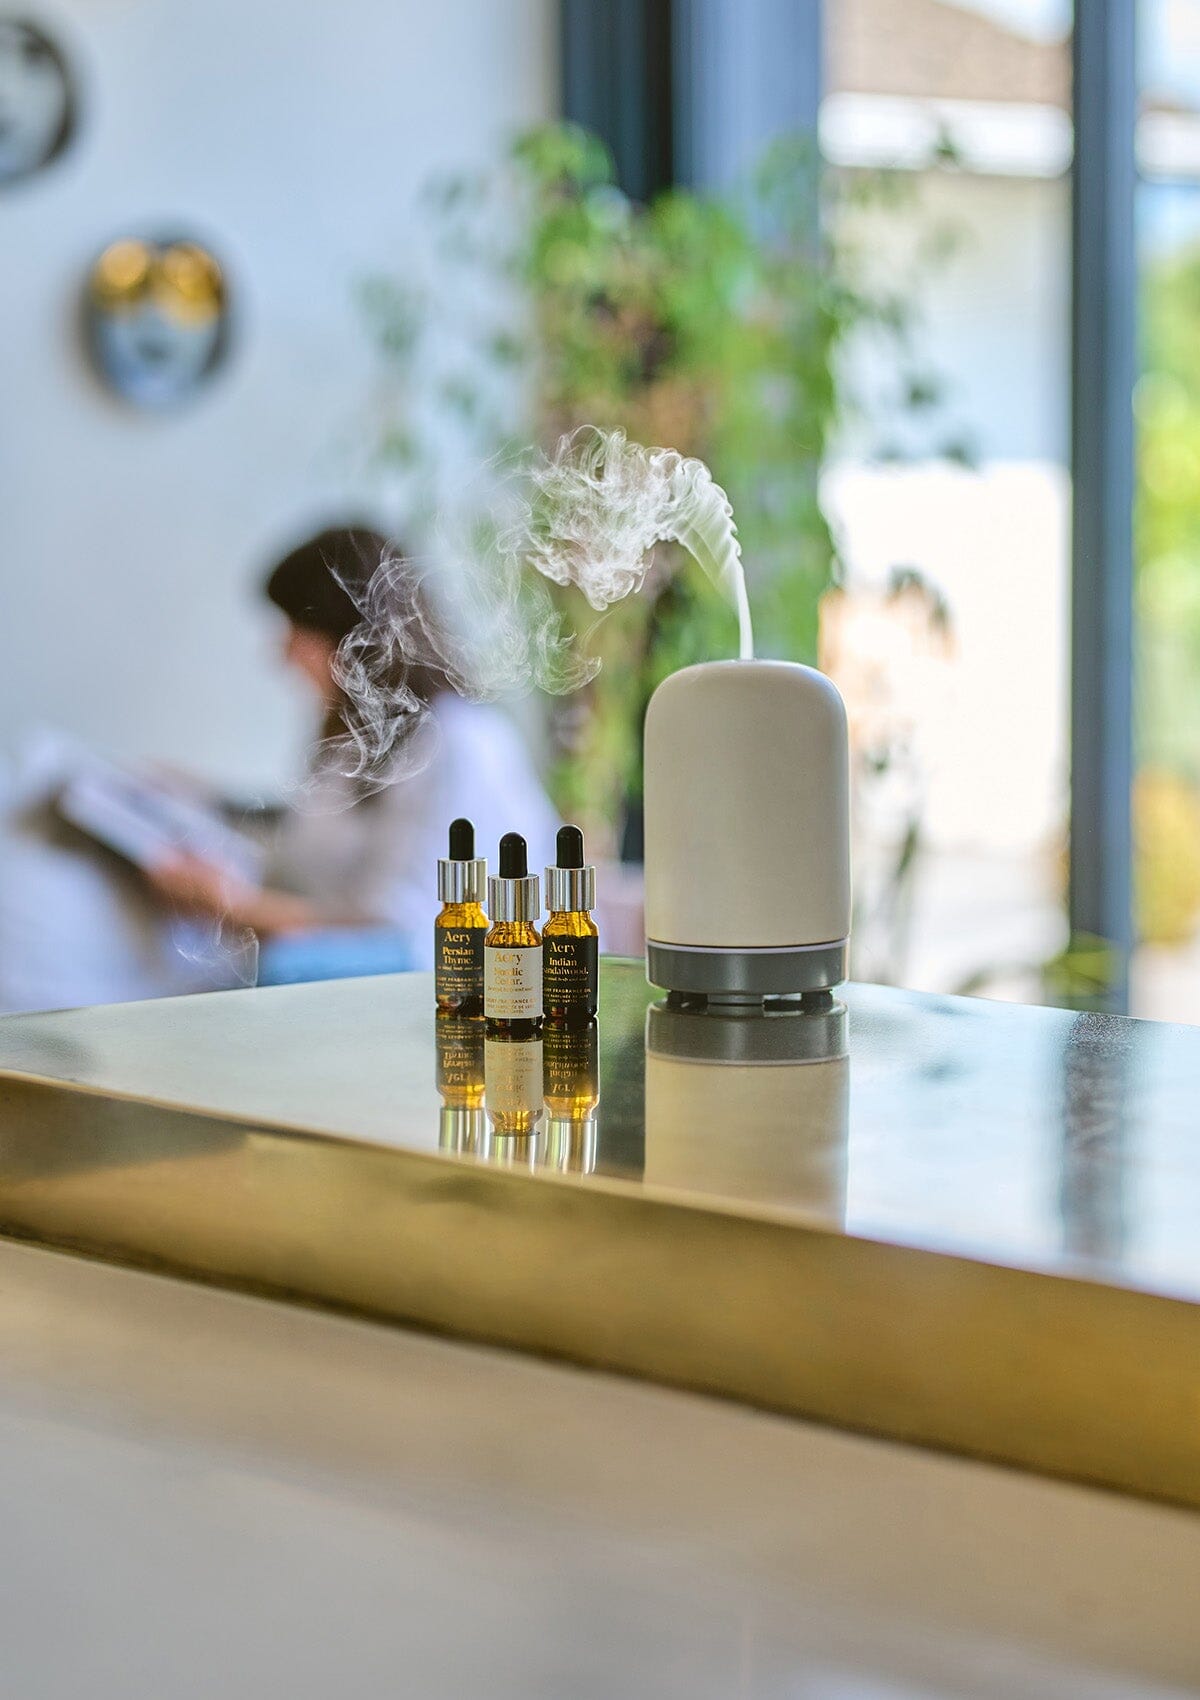 Grey Persian Thyme fragrance oil by Aery displayed next to Indian Sandalwood and Nordic Cedarleaf fragrance oils and electric diffuser placed on gold kitchen worktop